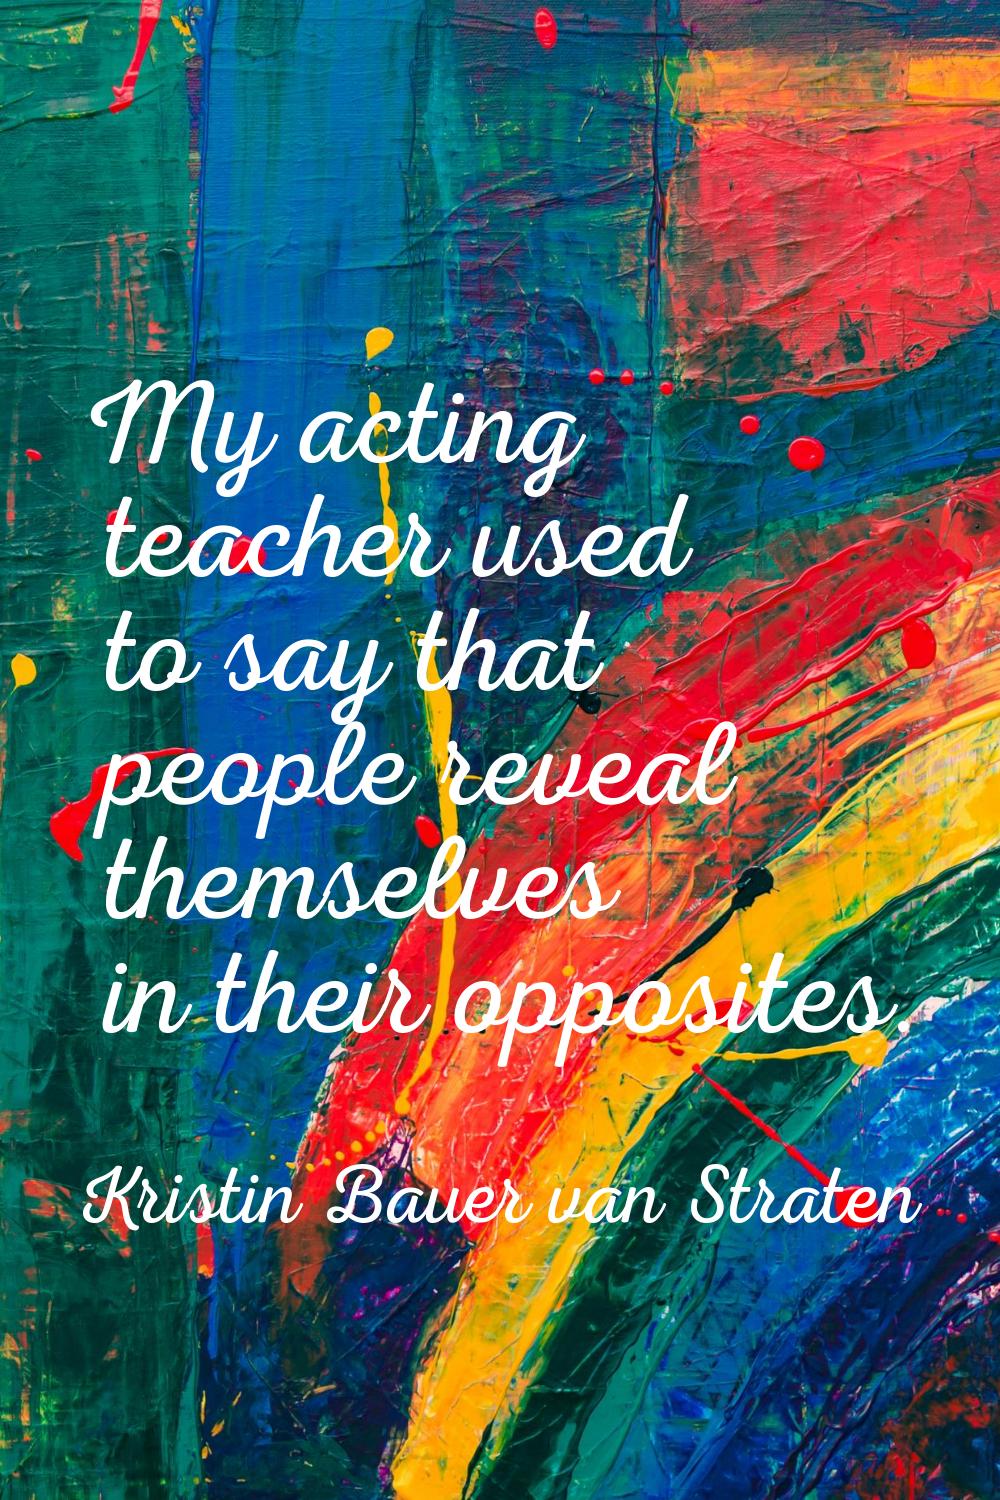 My acting teacher used to say that people reveal themselves in their opposites.